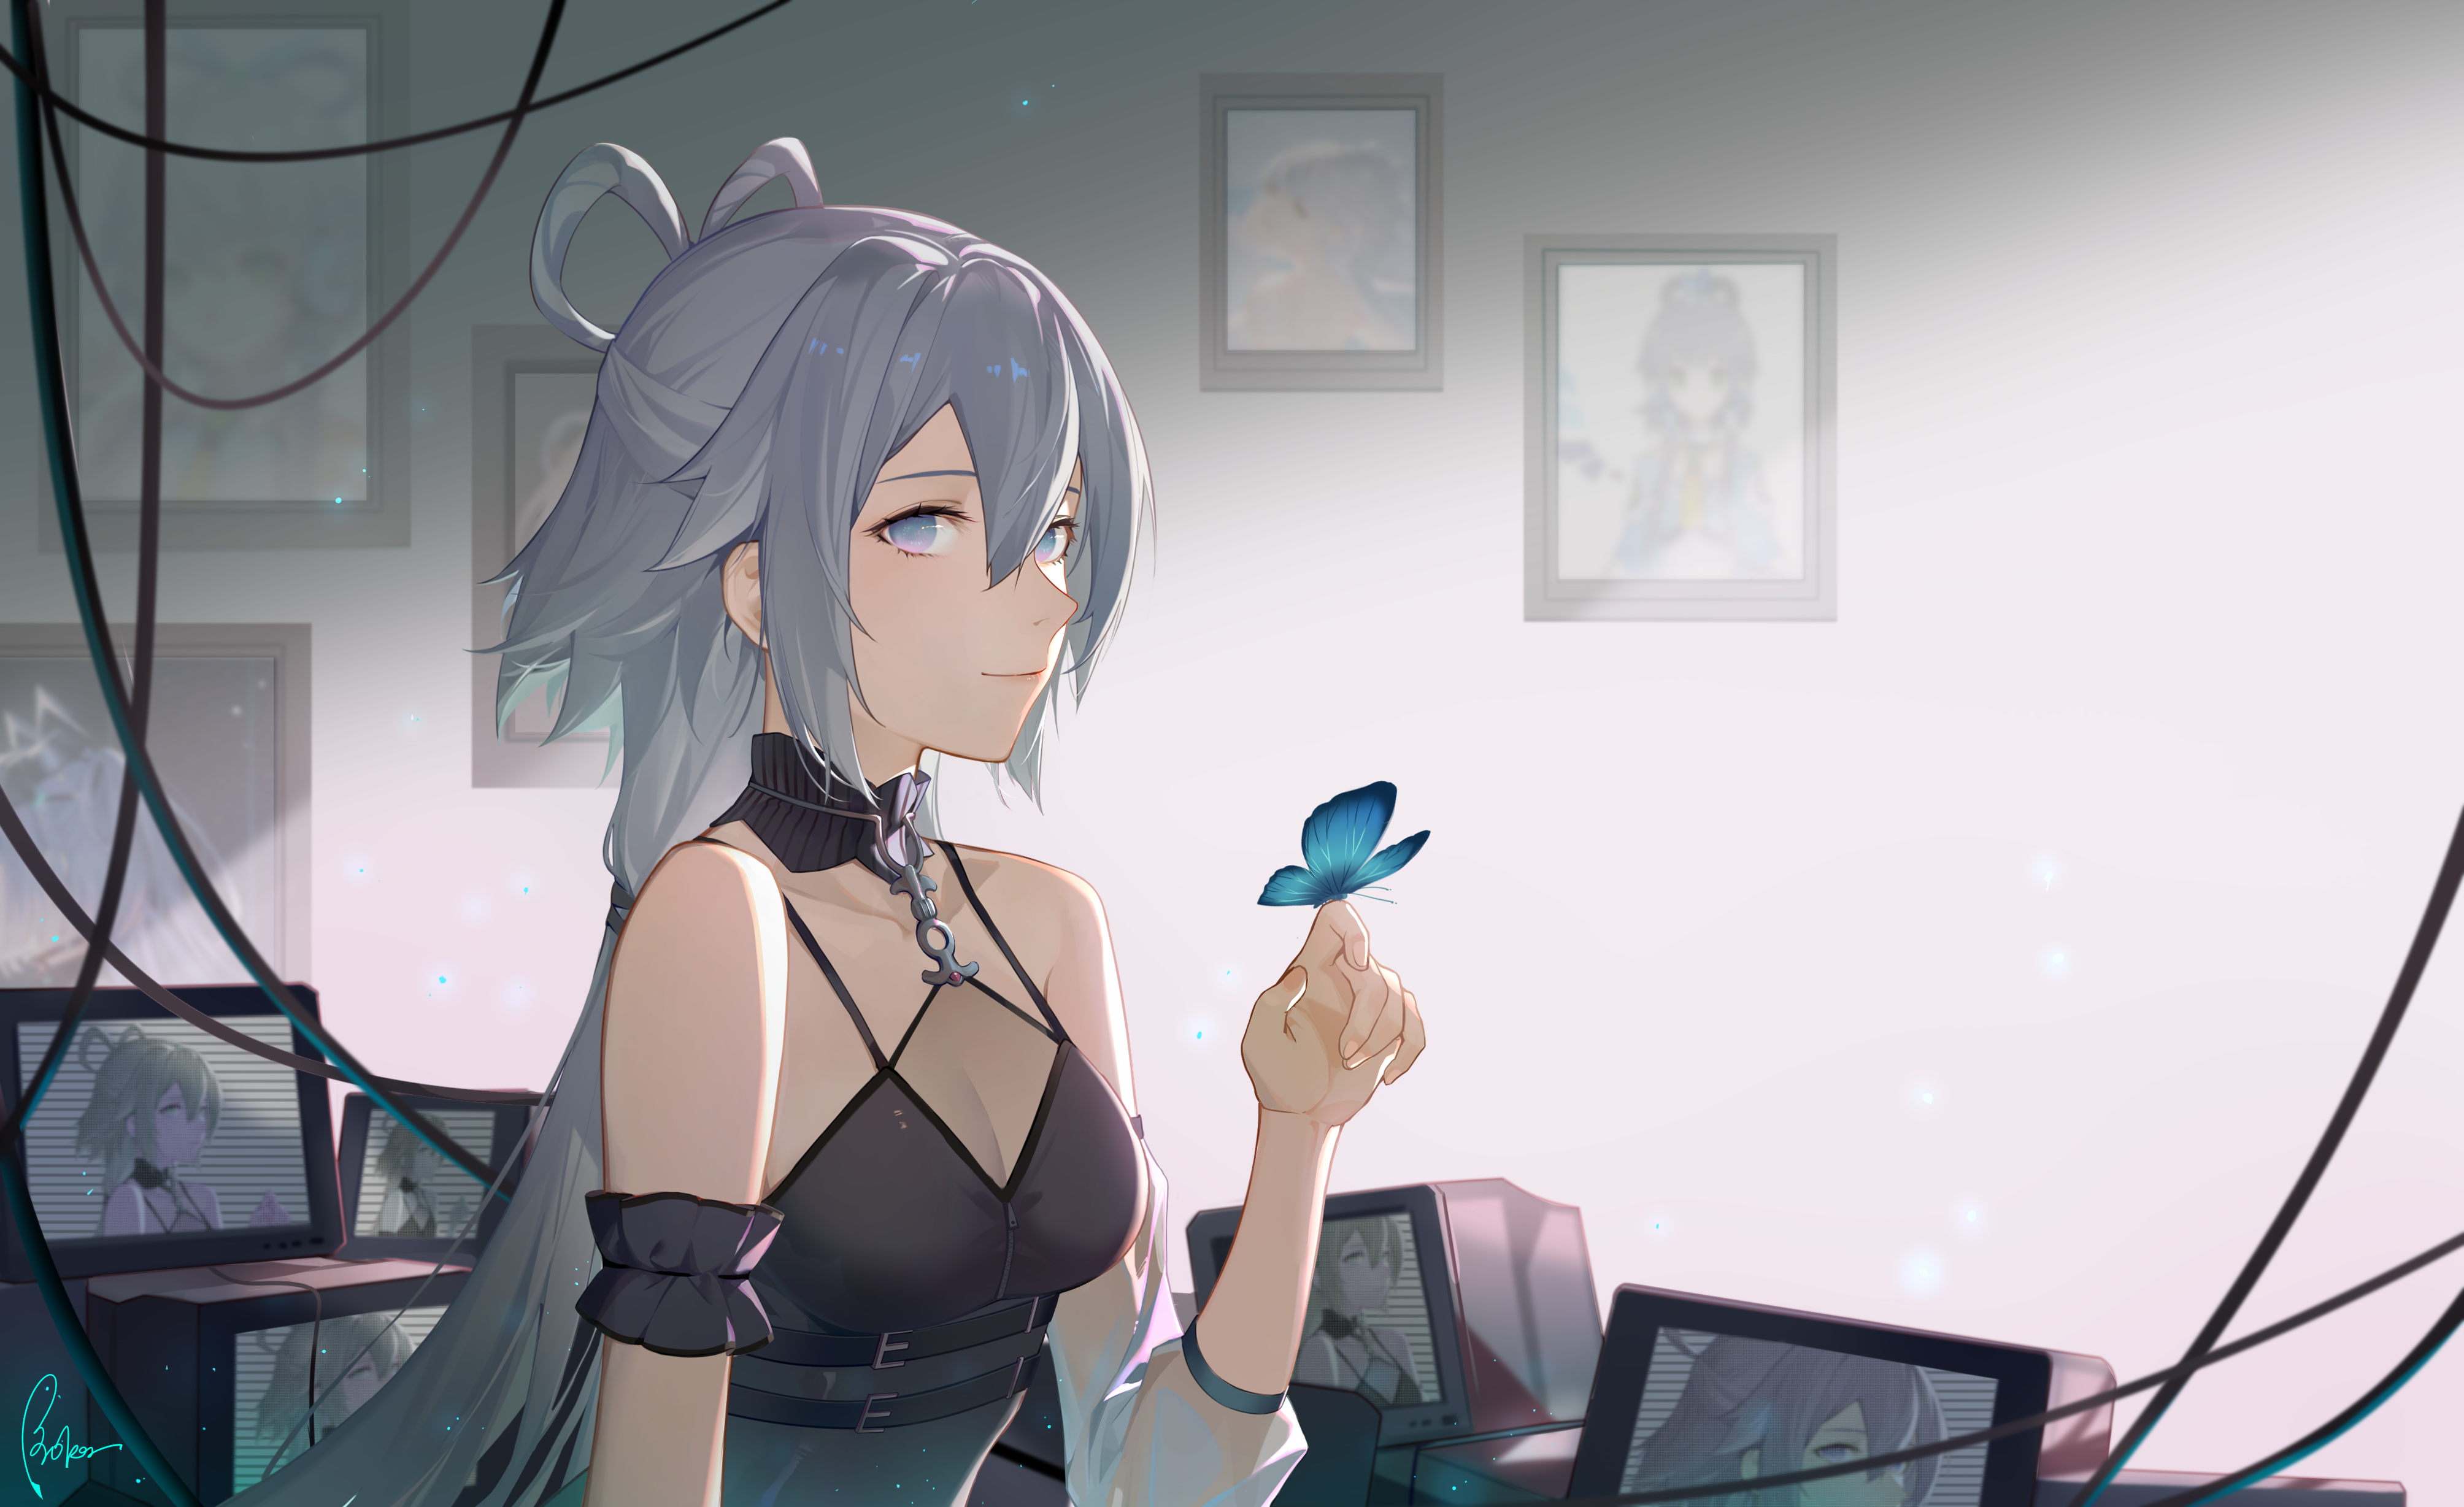 Anime Anime Girls Vocaloid Wires Long Hair TV Photo Frame Wall Smiling Luo Tianyi Grey Hair Gray Eye 4016x2457